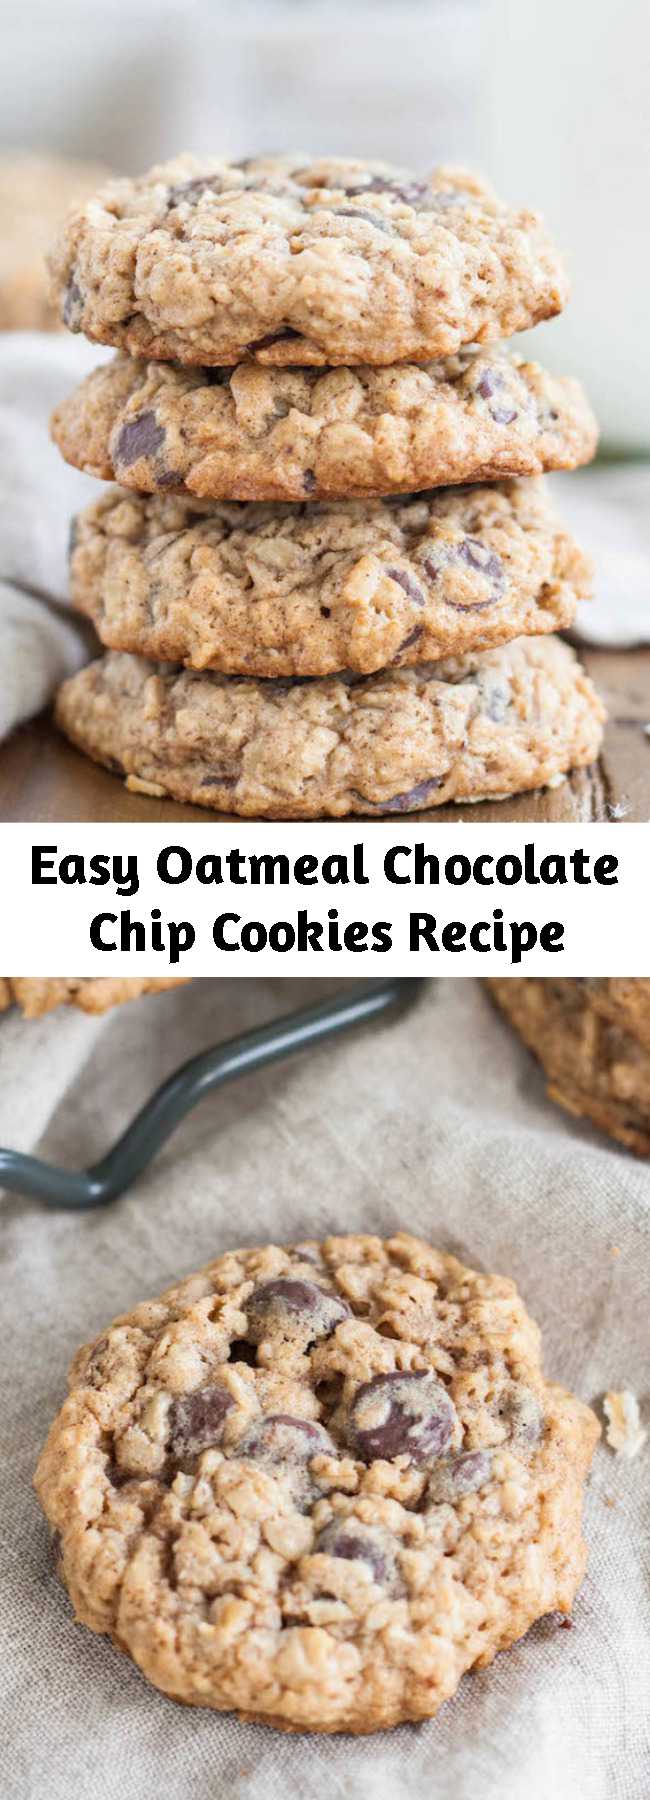 Easy Oatmeal Chocolate Chip Cookies Recipe - The only oatmeal cookie recipe you will ever need! Soft and chewy oatmeal chocolate chip cookies loaded with oats and chocolate chips!